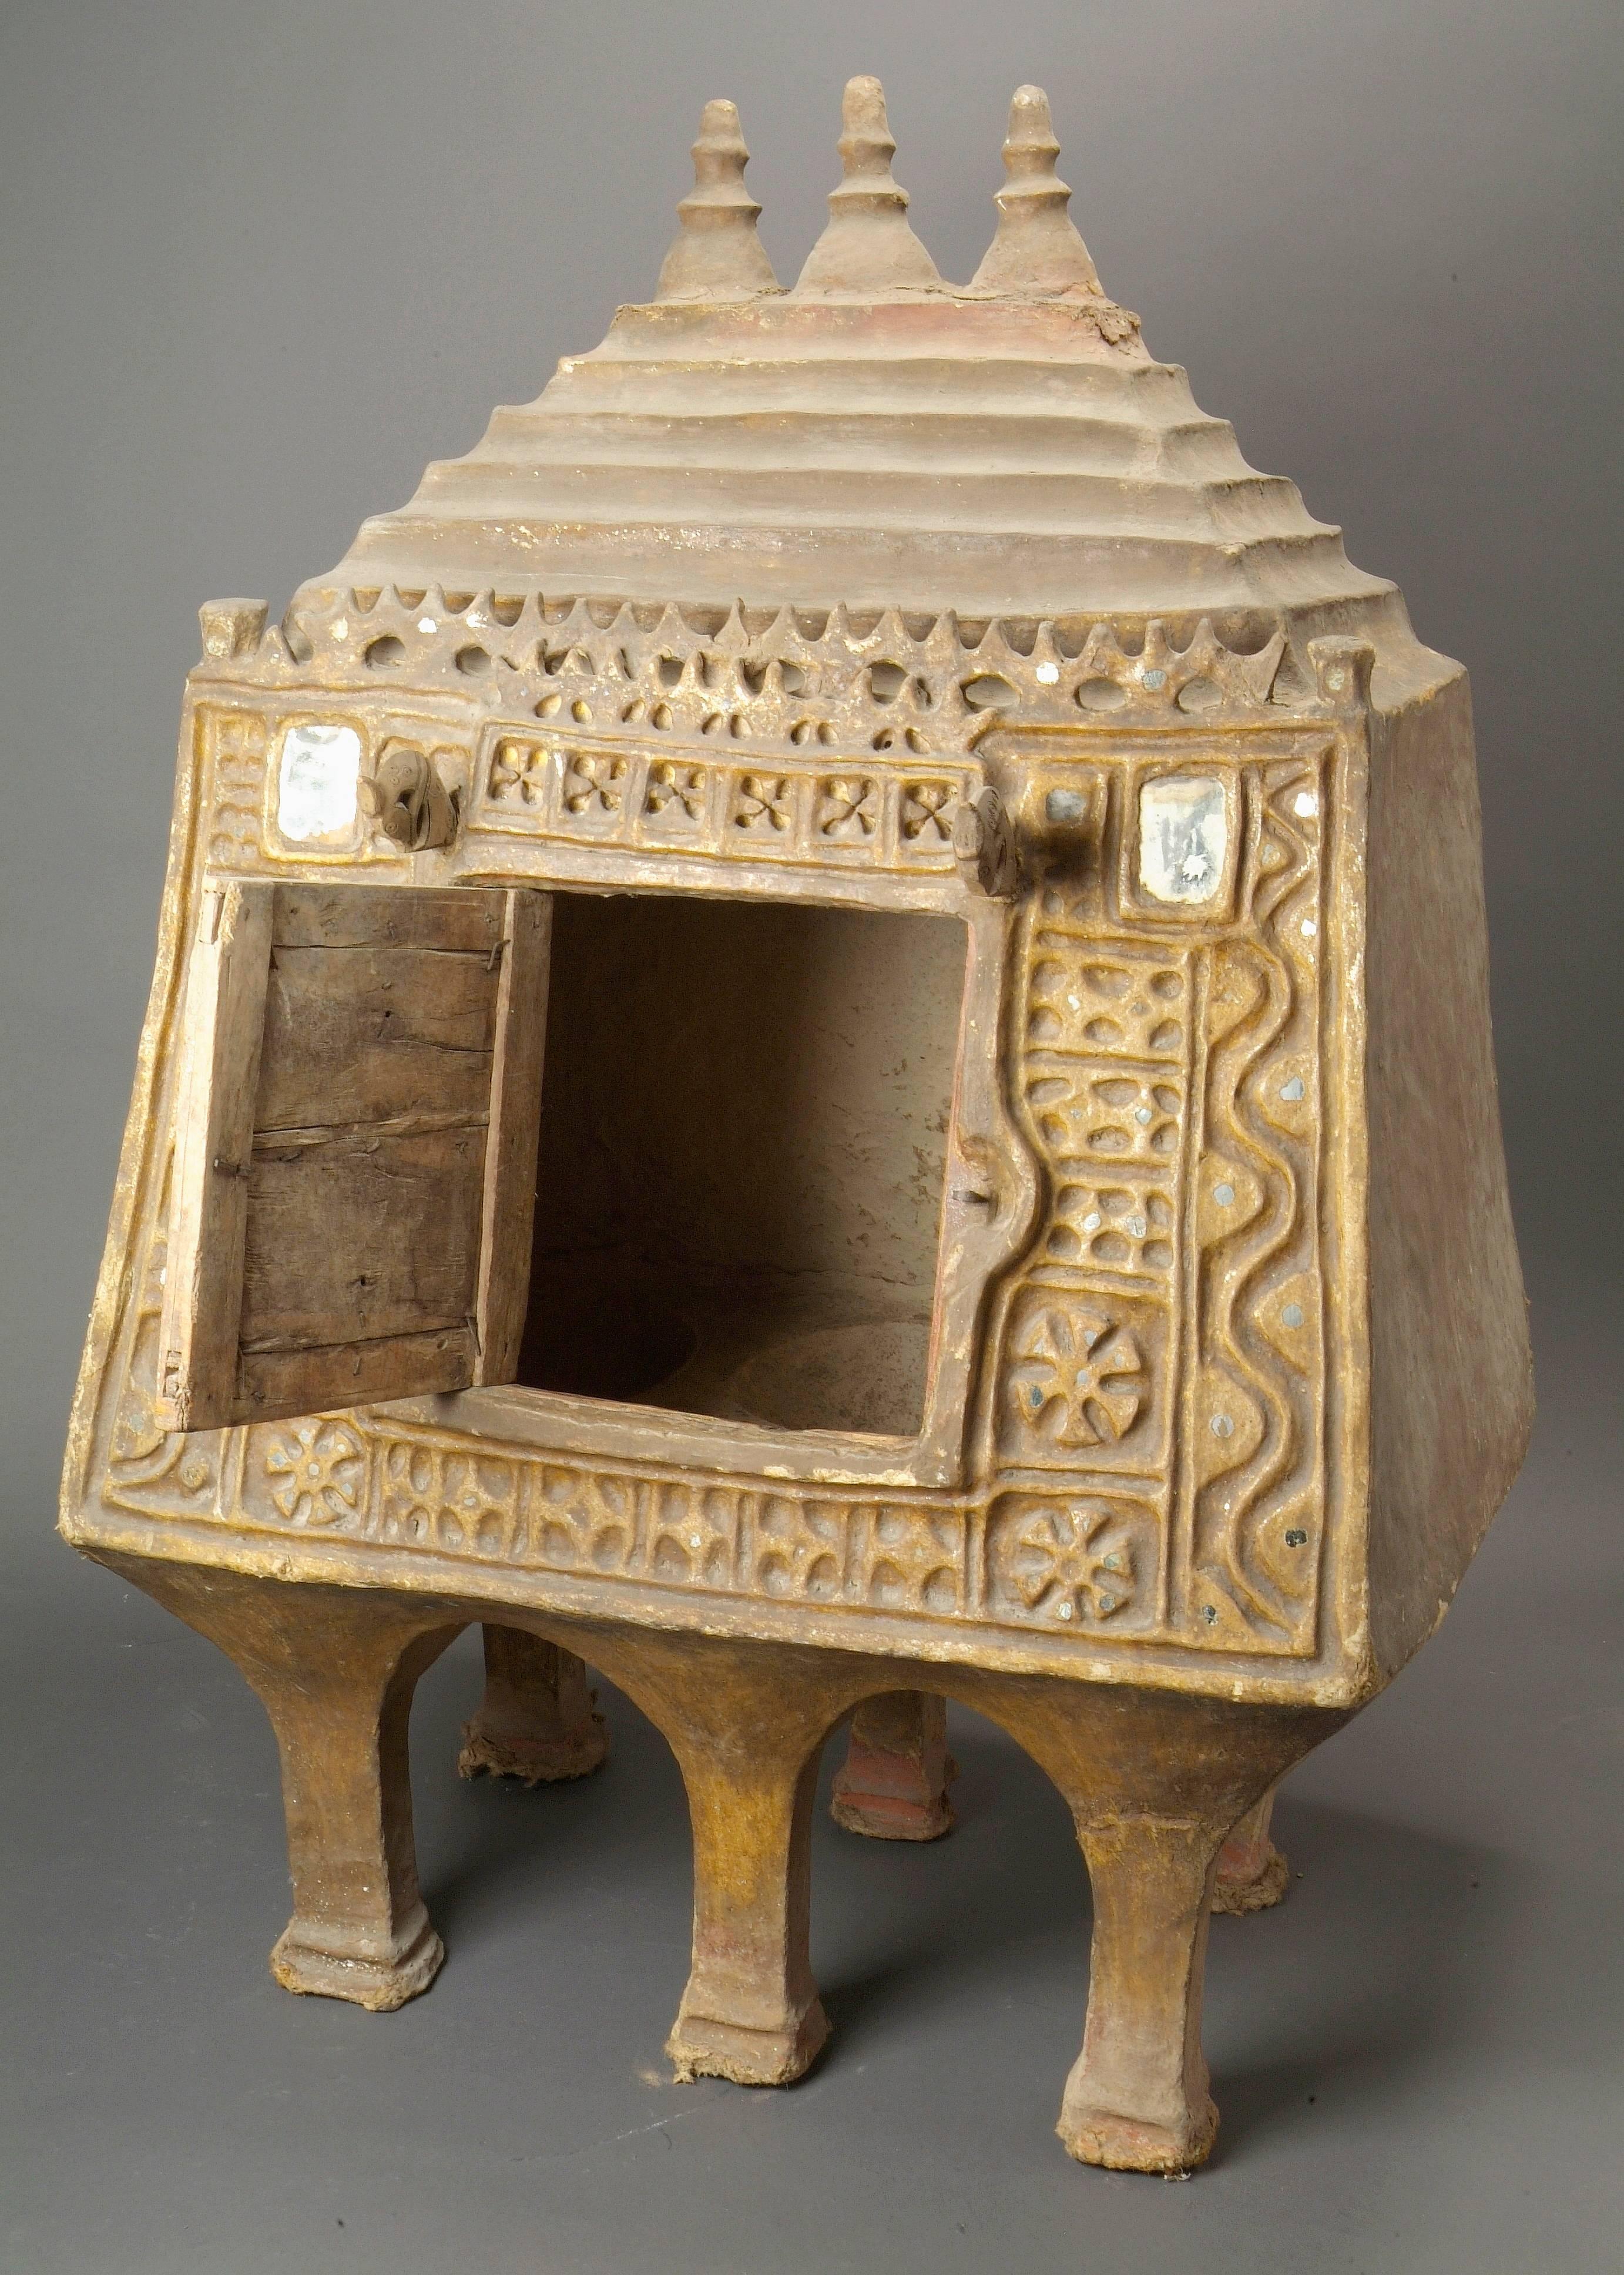 Very important pyramid-shaped pantry in papier-mâché delicately carved - step roof - opening by a wooden door with iron lock - on each side of the door, wooden stylized bird and mirror -
supported by six legs -
Afghanistan, 18th